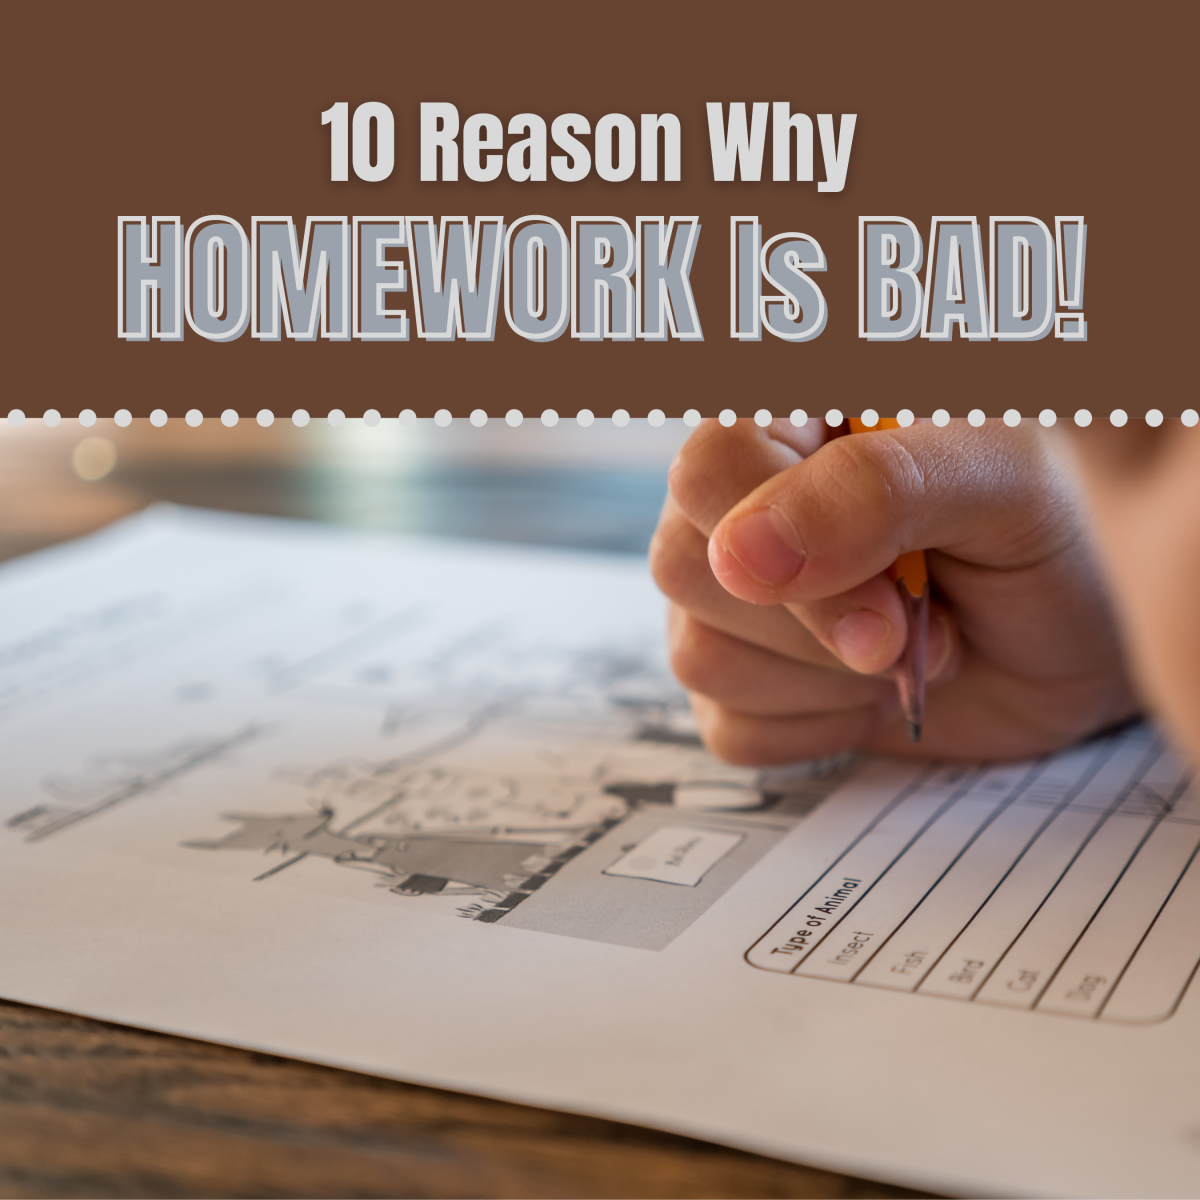 what are 3 reasons why homework is bad